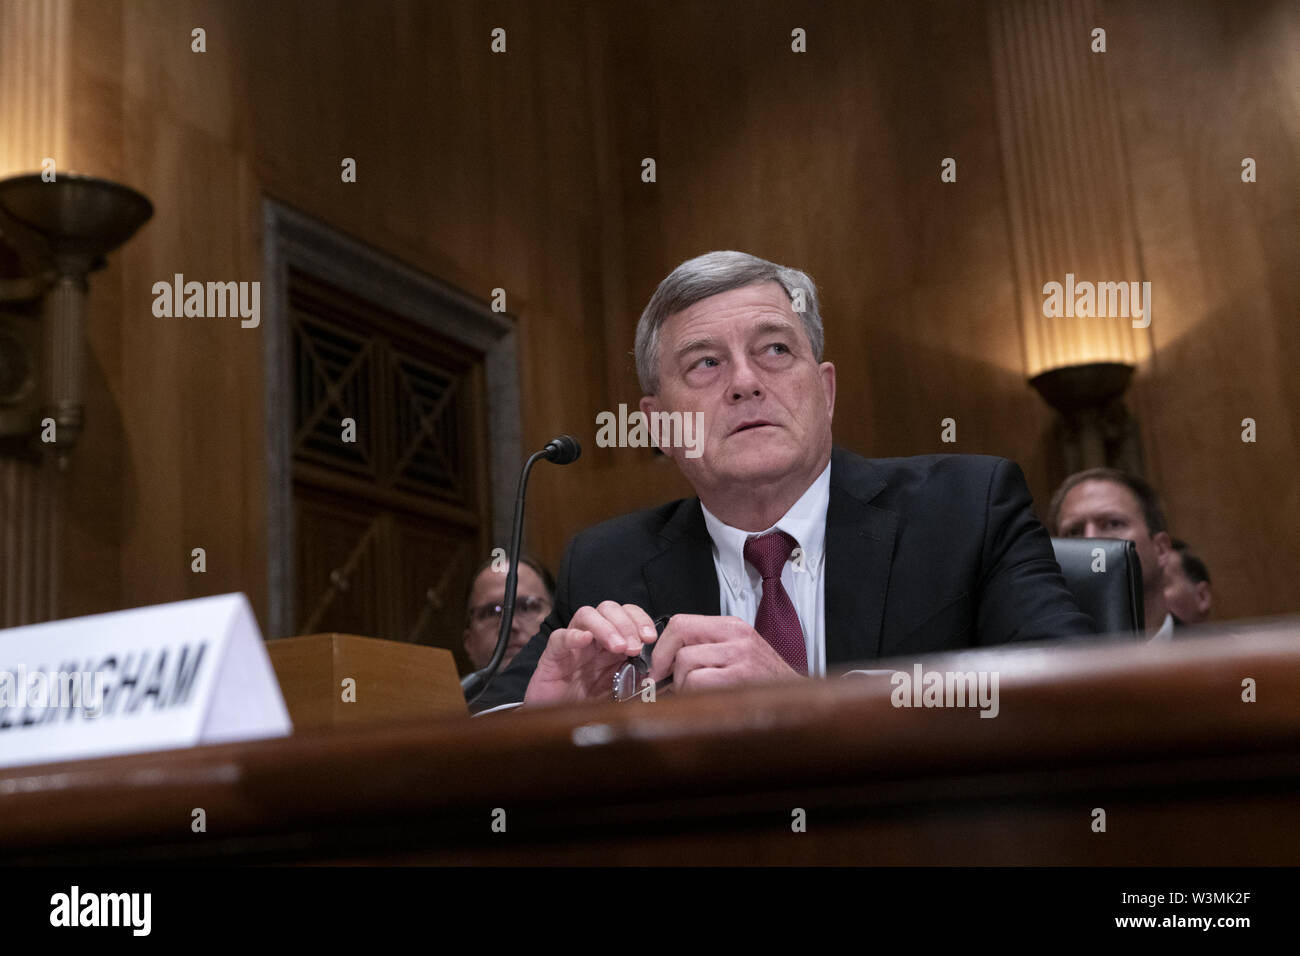 Washington, District of Columbia, USA. 16th July, 2019. Steven Dillingham, Director of the U.S. Census Bureau, testifies before the U.S. Senate Committee on Homeland Security and Governmental Affairs on Capitol Hill in Washington, DC, U.S. on July 16, 2019, discussing the security and accuracy of the 2020 census. Credit: Stefani Reynolds/CNP/ZUMA Wire/Alamy Live News Stock Photo